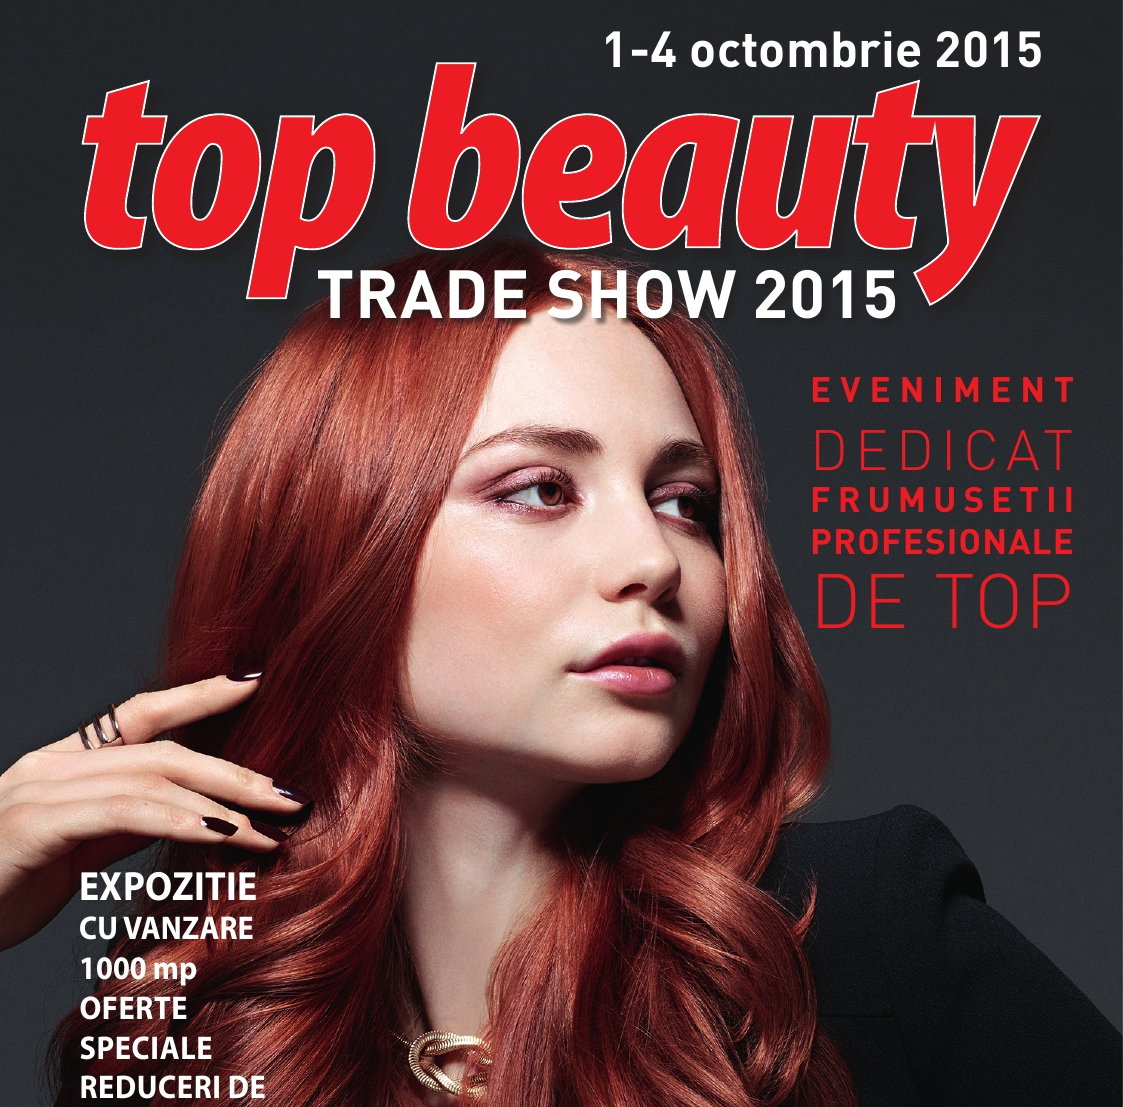 TOP BEAUTY TRADE SHOW 2015 -